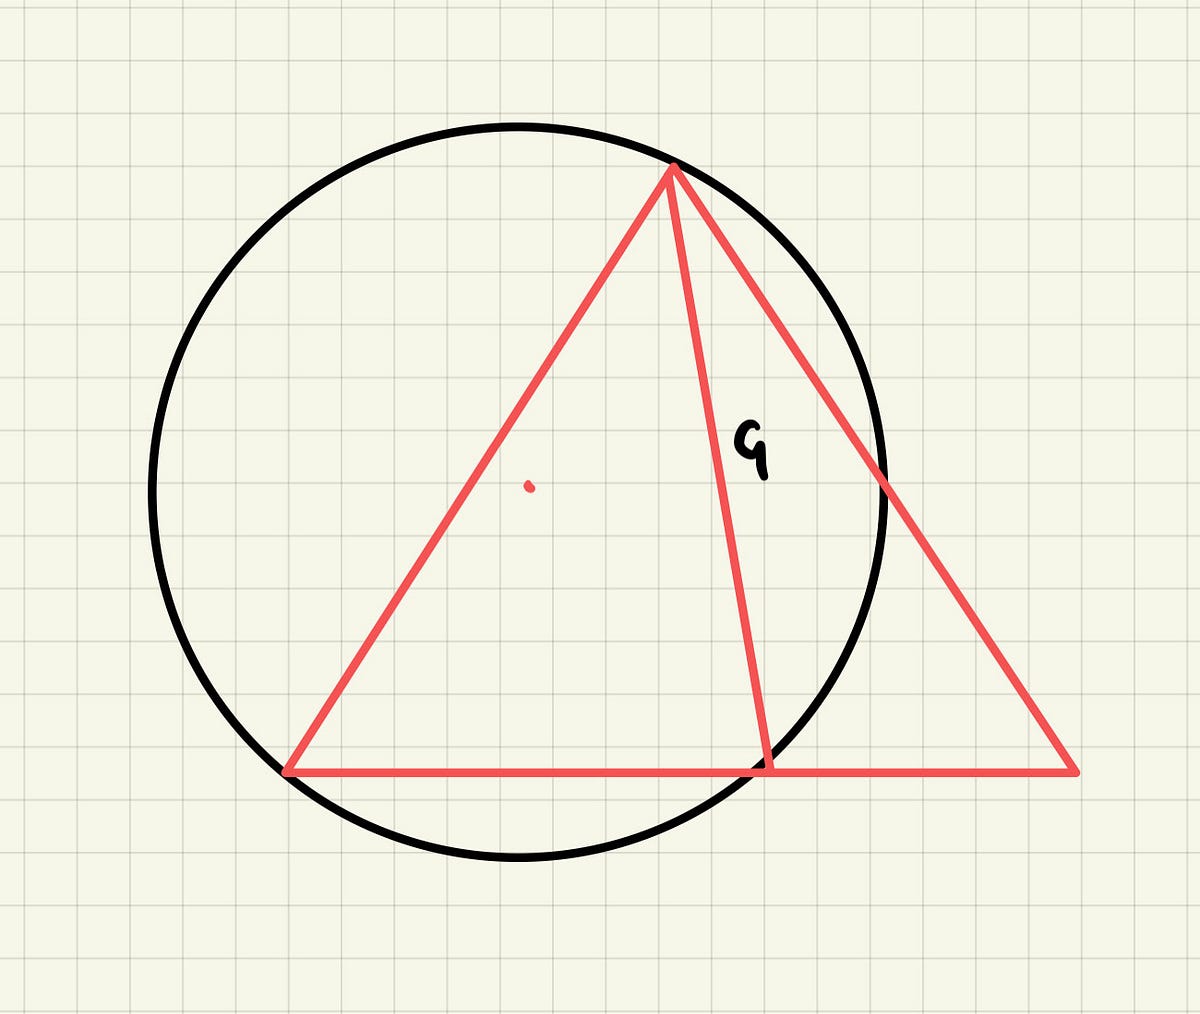 what-is-the-area-of-the-circle-the-triangle-is-equilateral-what-s